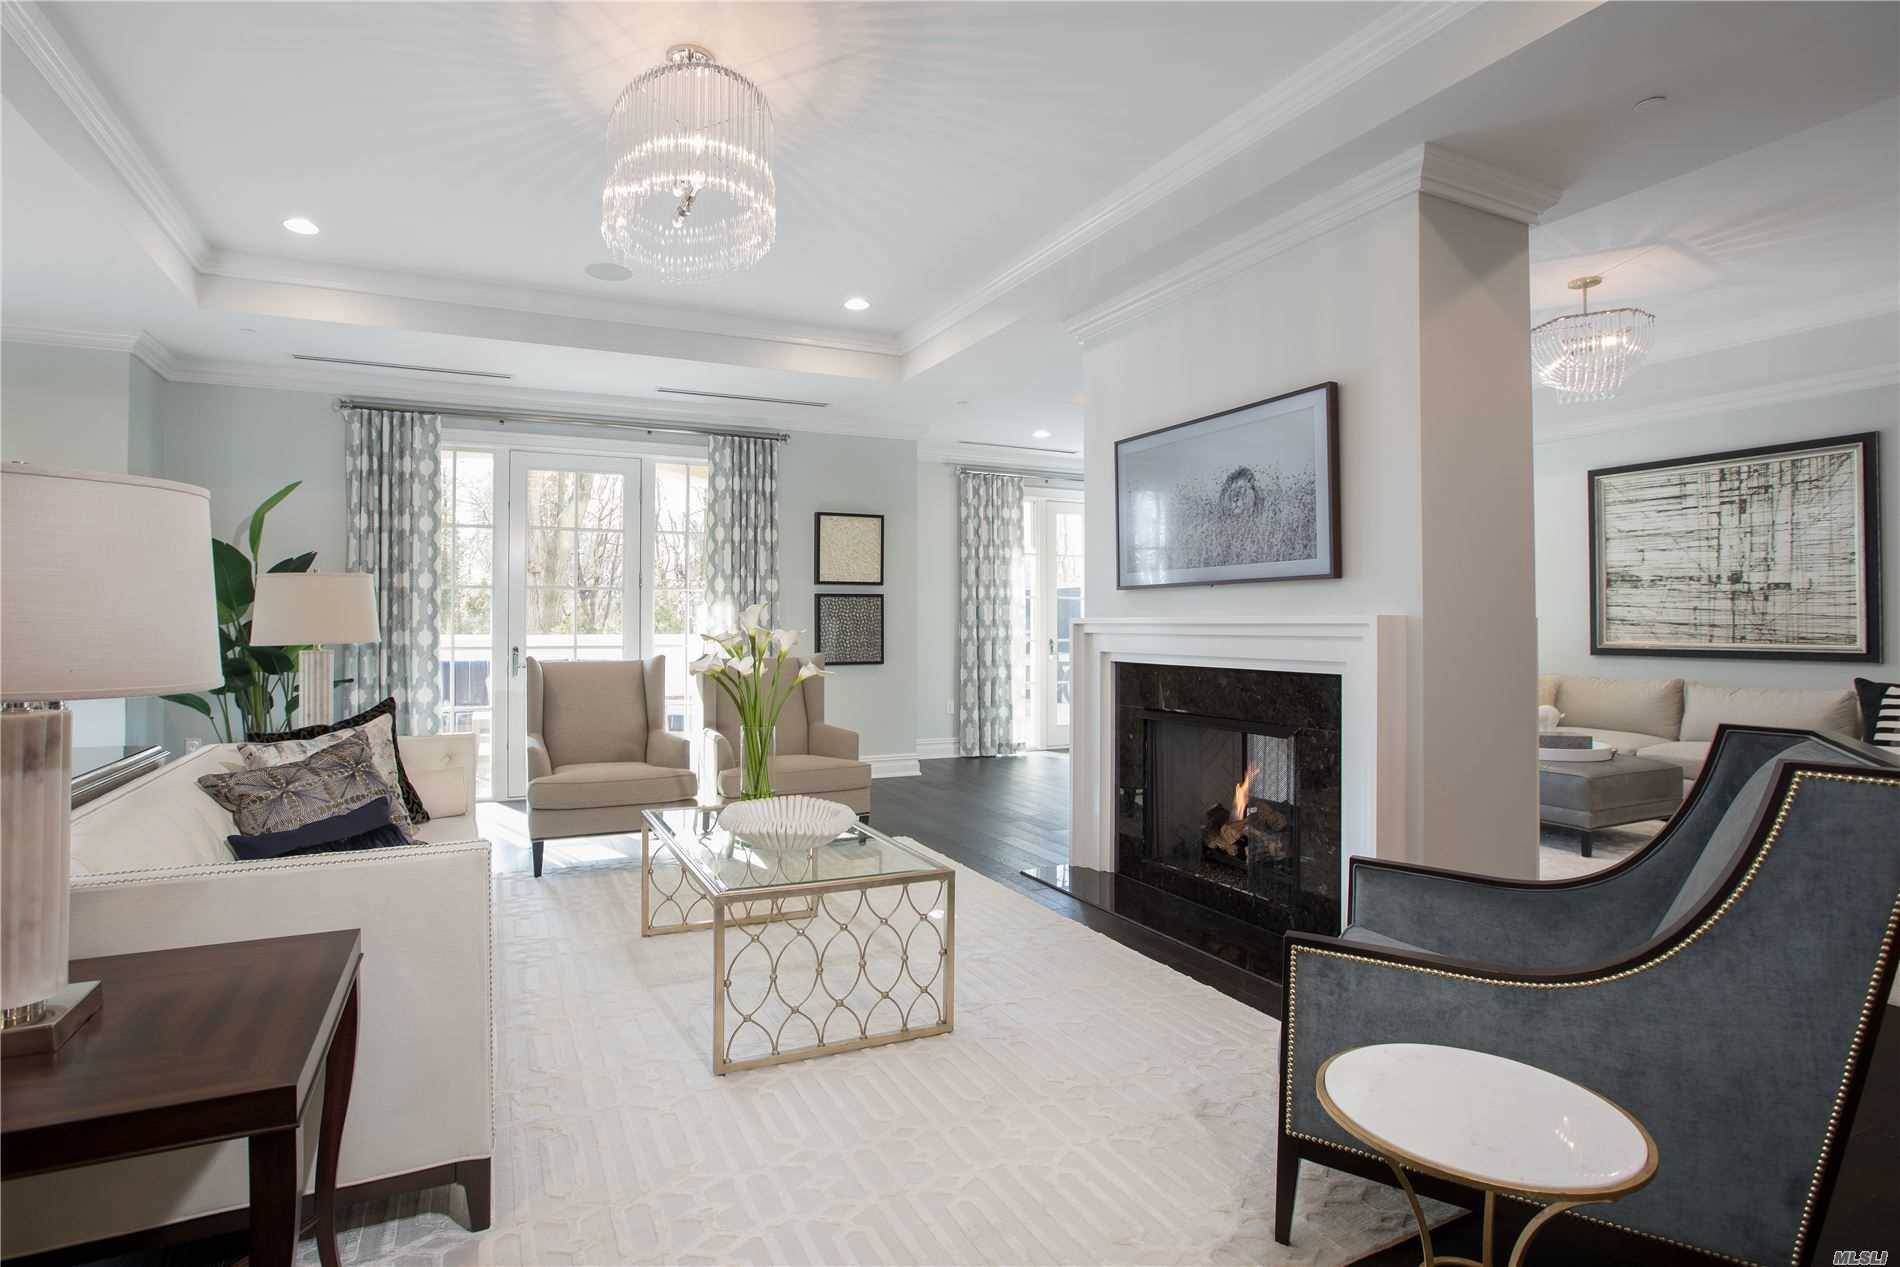 Expansive 3 bedroom, 3. 5 bathroom residence at The Ritz Carlton North Hills features a beautiful entry foyer that leads to a spacious living area with den, hardwood floors, dual ...